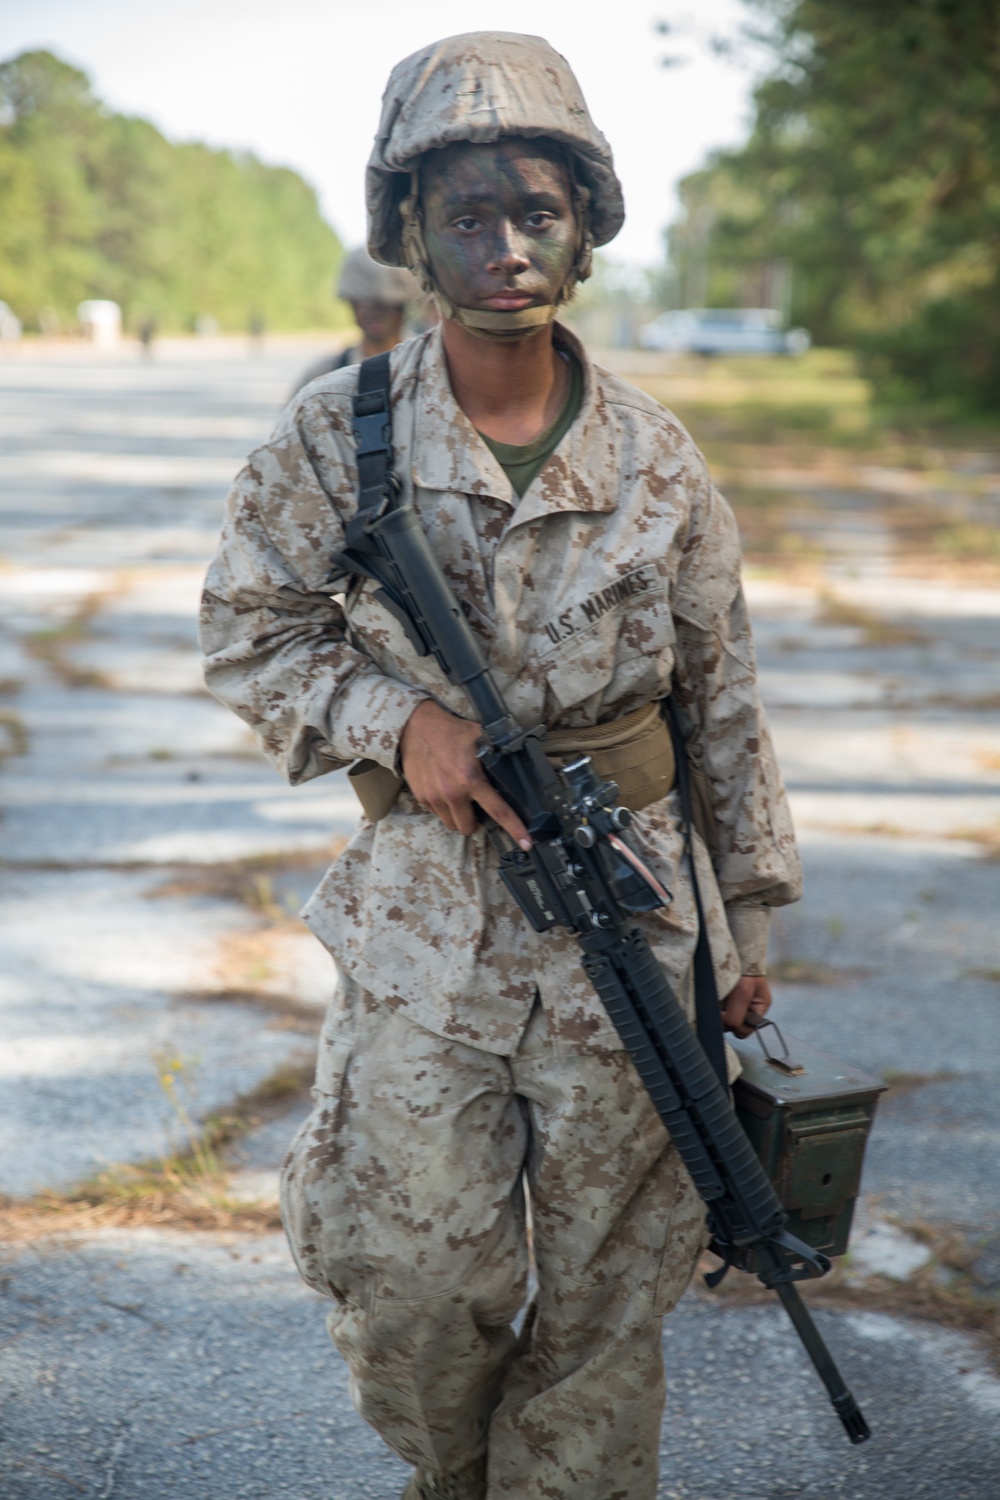 Parris Island trains siblings to be Marines